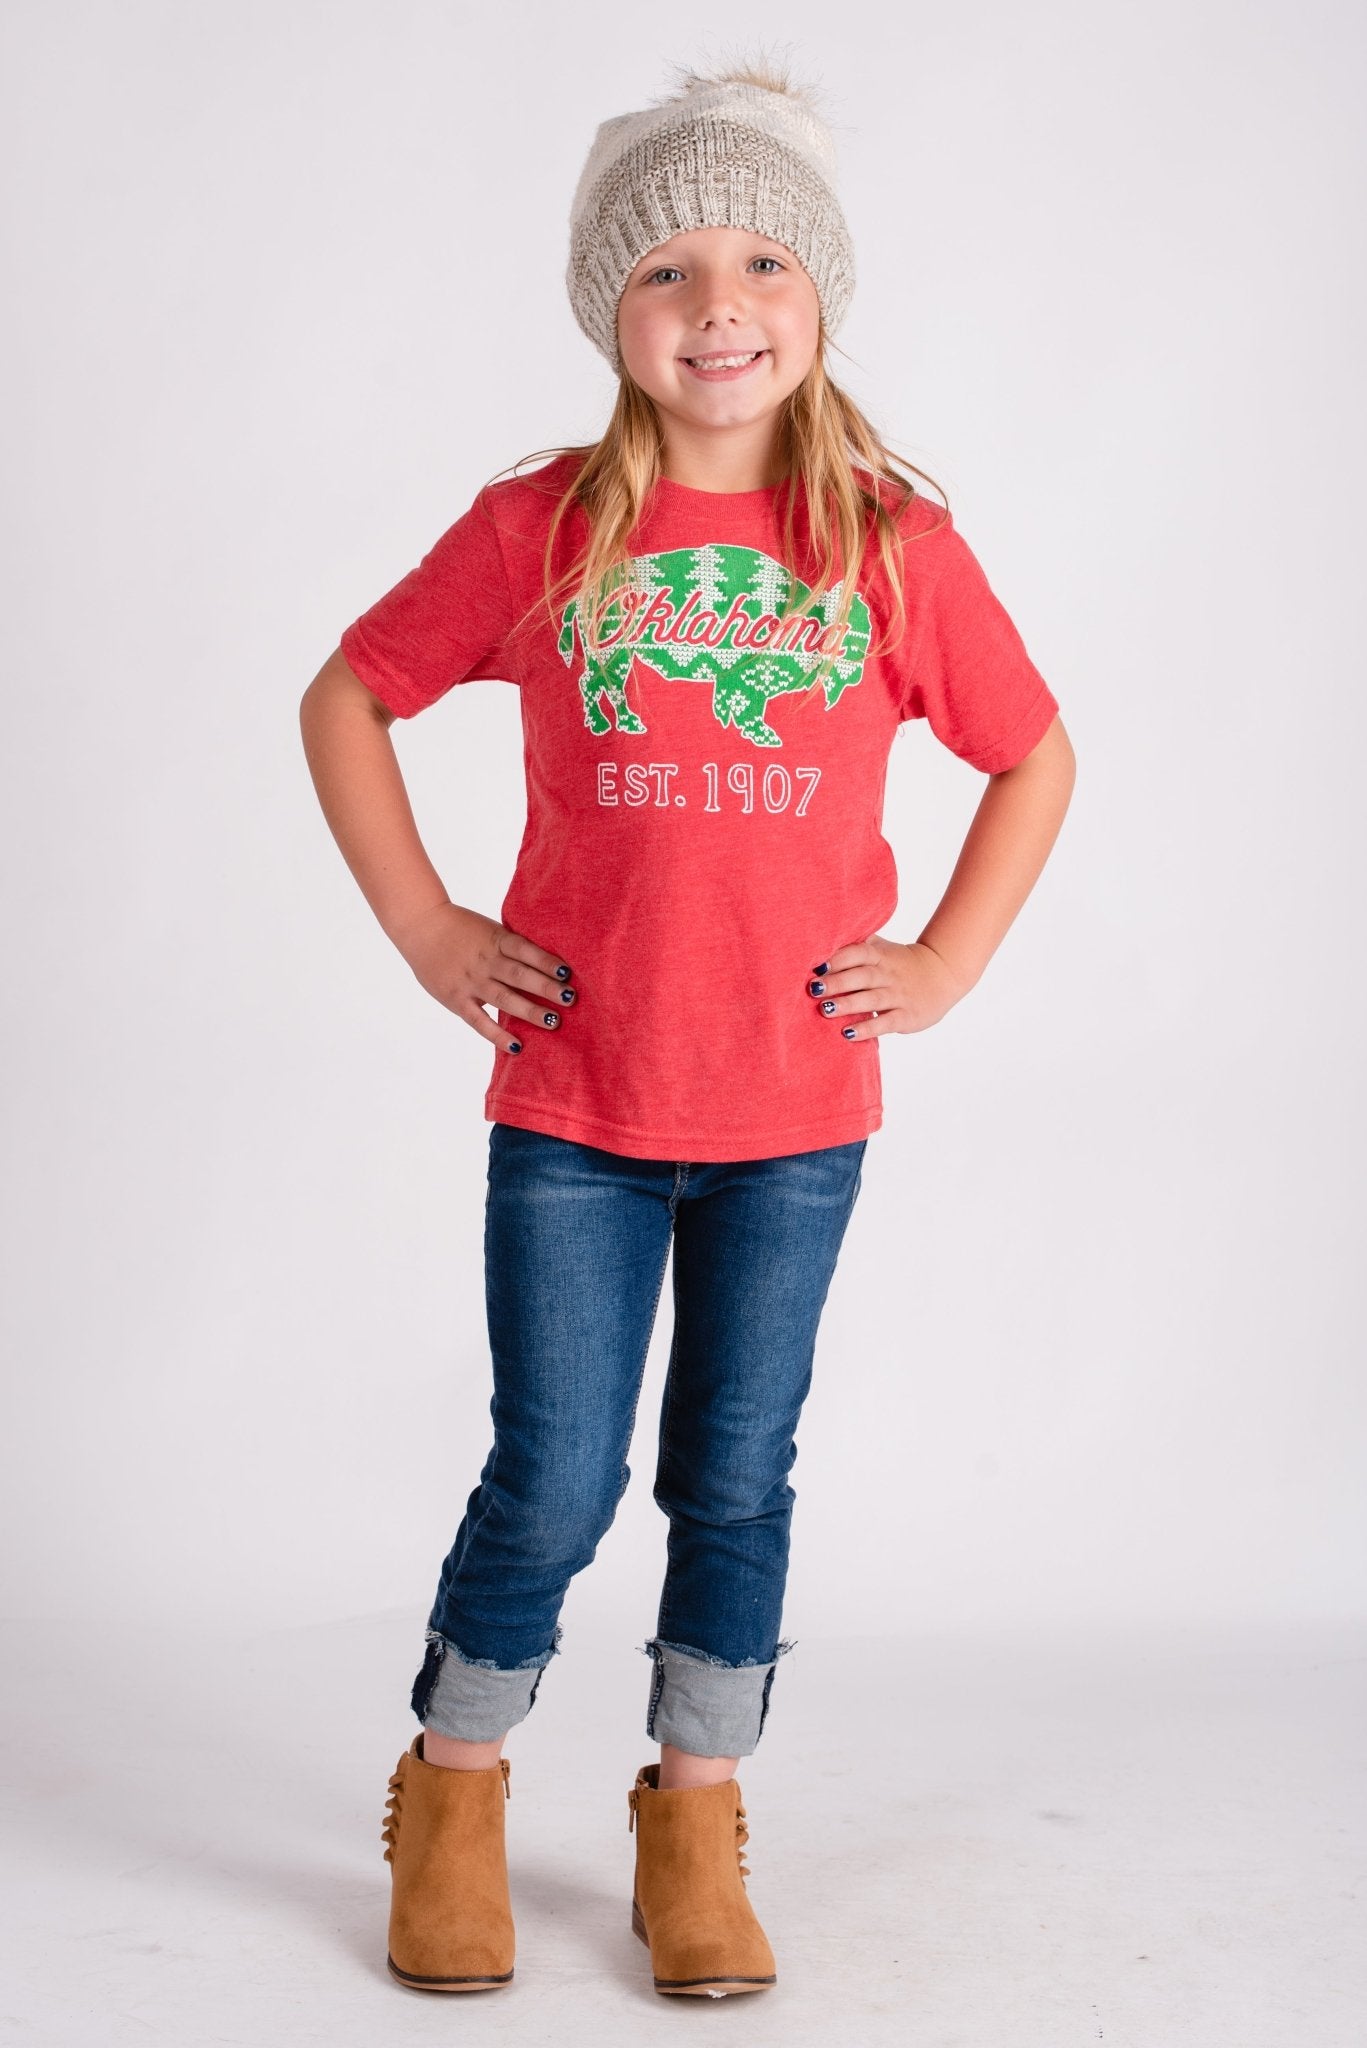 KIDS Oklahoma tree bison t-shirt red - Trendy T-shirts - Fashion Graphic T-Shirts at Lush Fashion Lounge Boutique in Oklahoma City